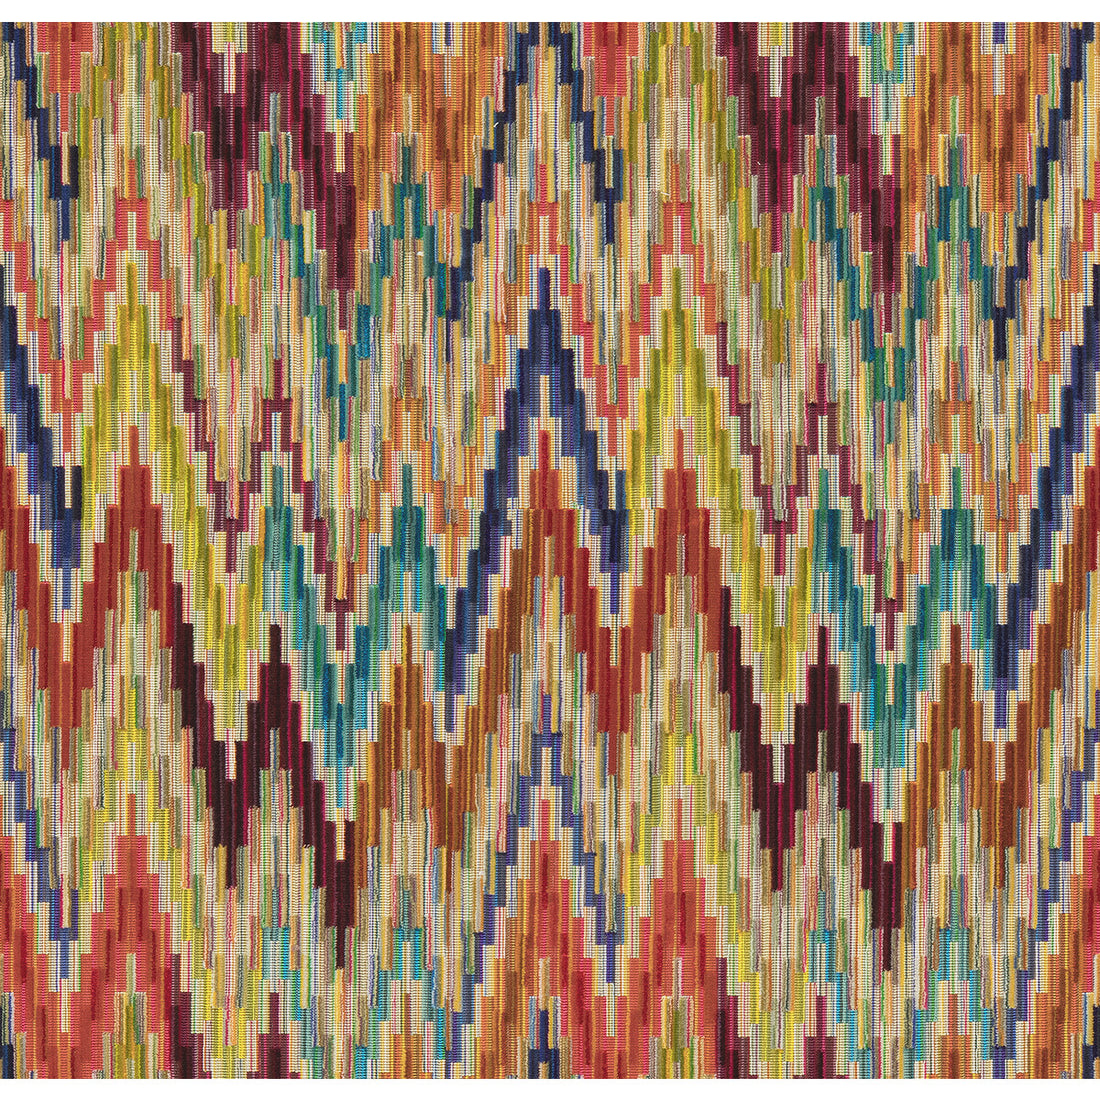 Kravet Couture fabric in 34232-519 color - pattern 34232.519.0 - by Kravet Couture